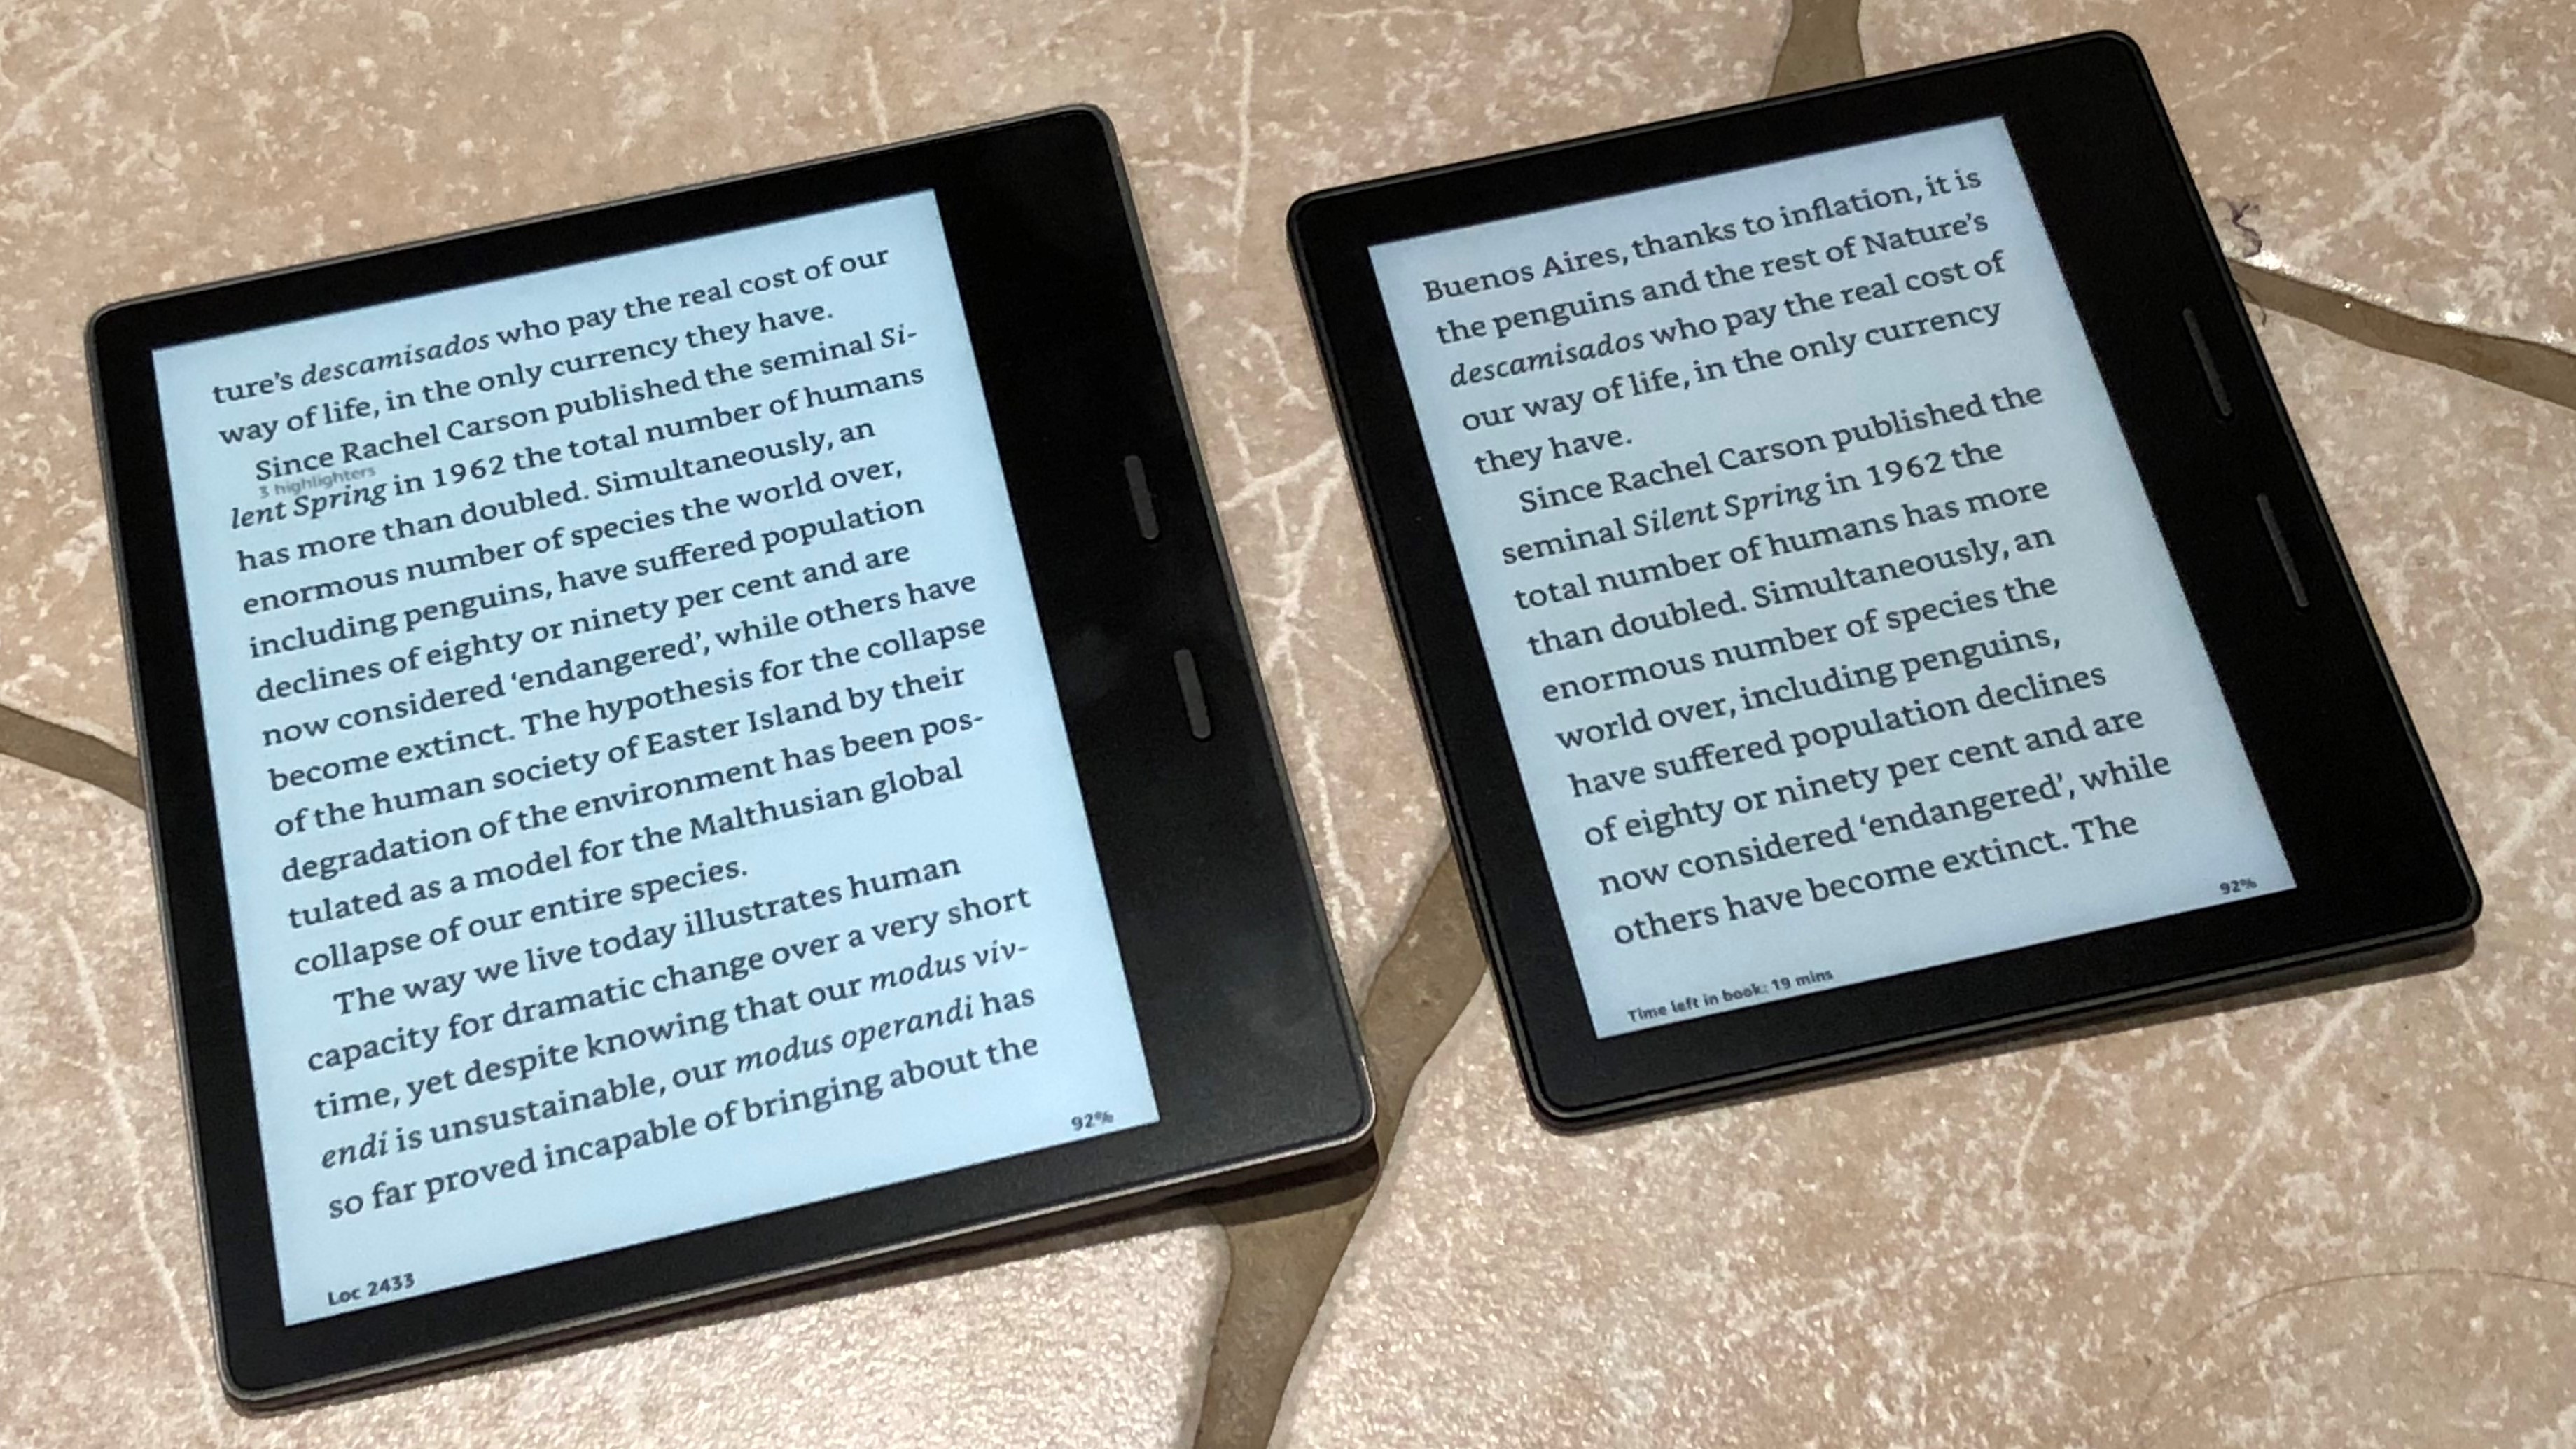 Amazon Kindle Oasis review: still lovely, now with a larger 7-inch